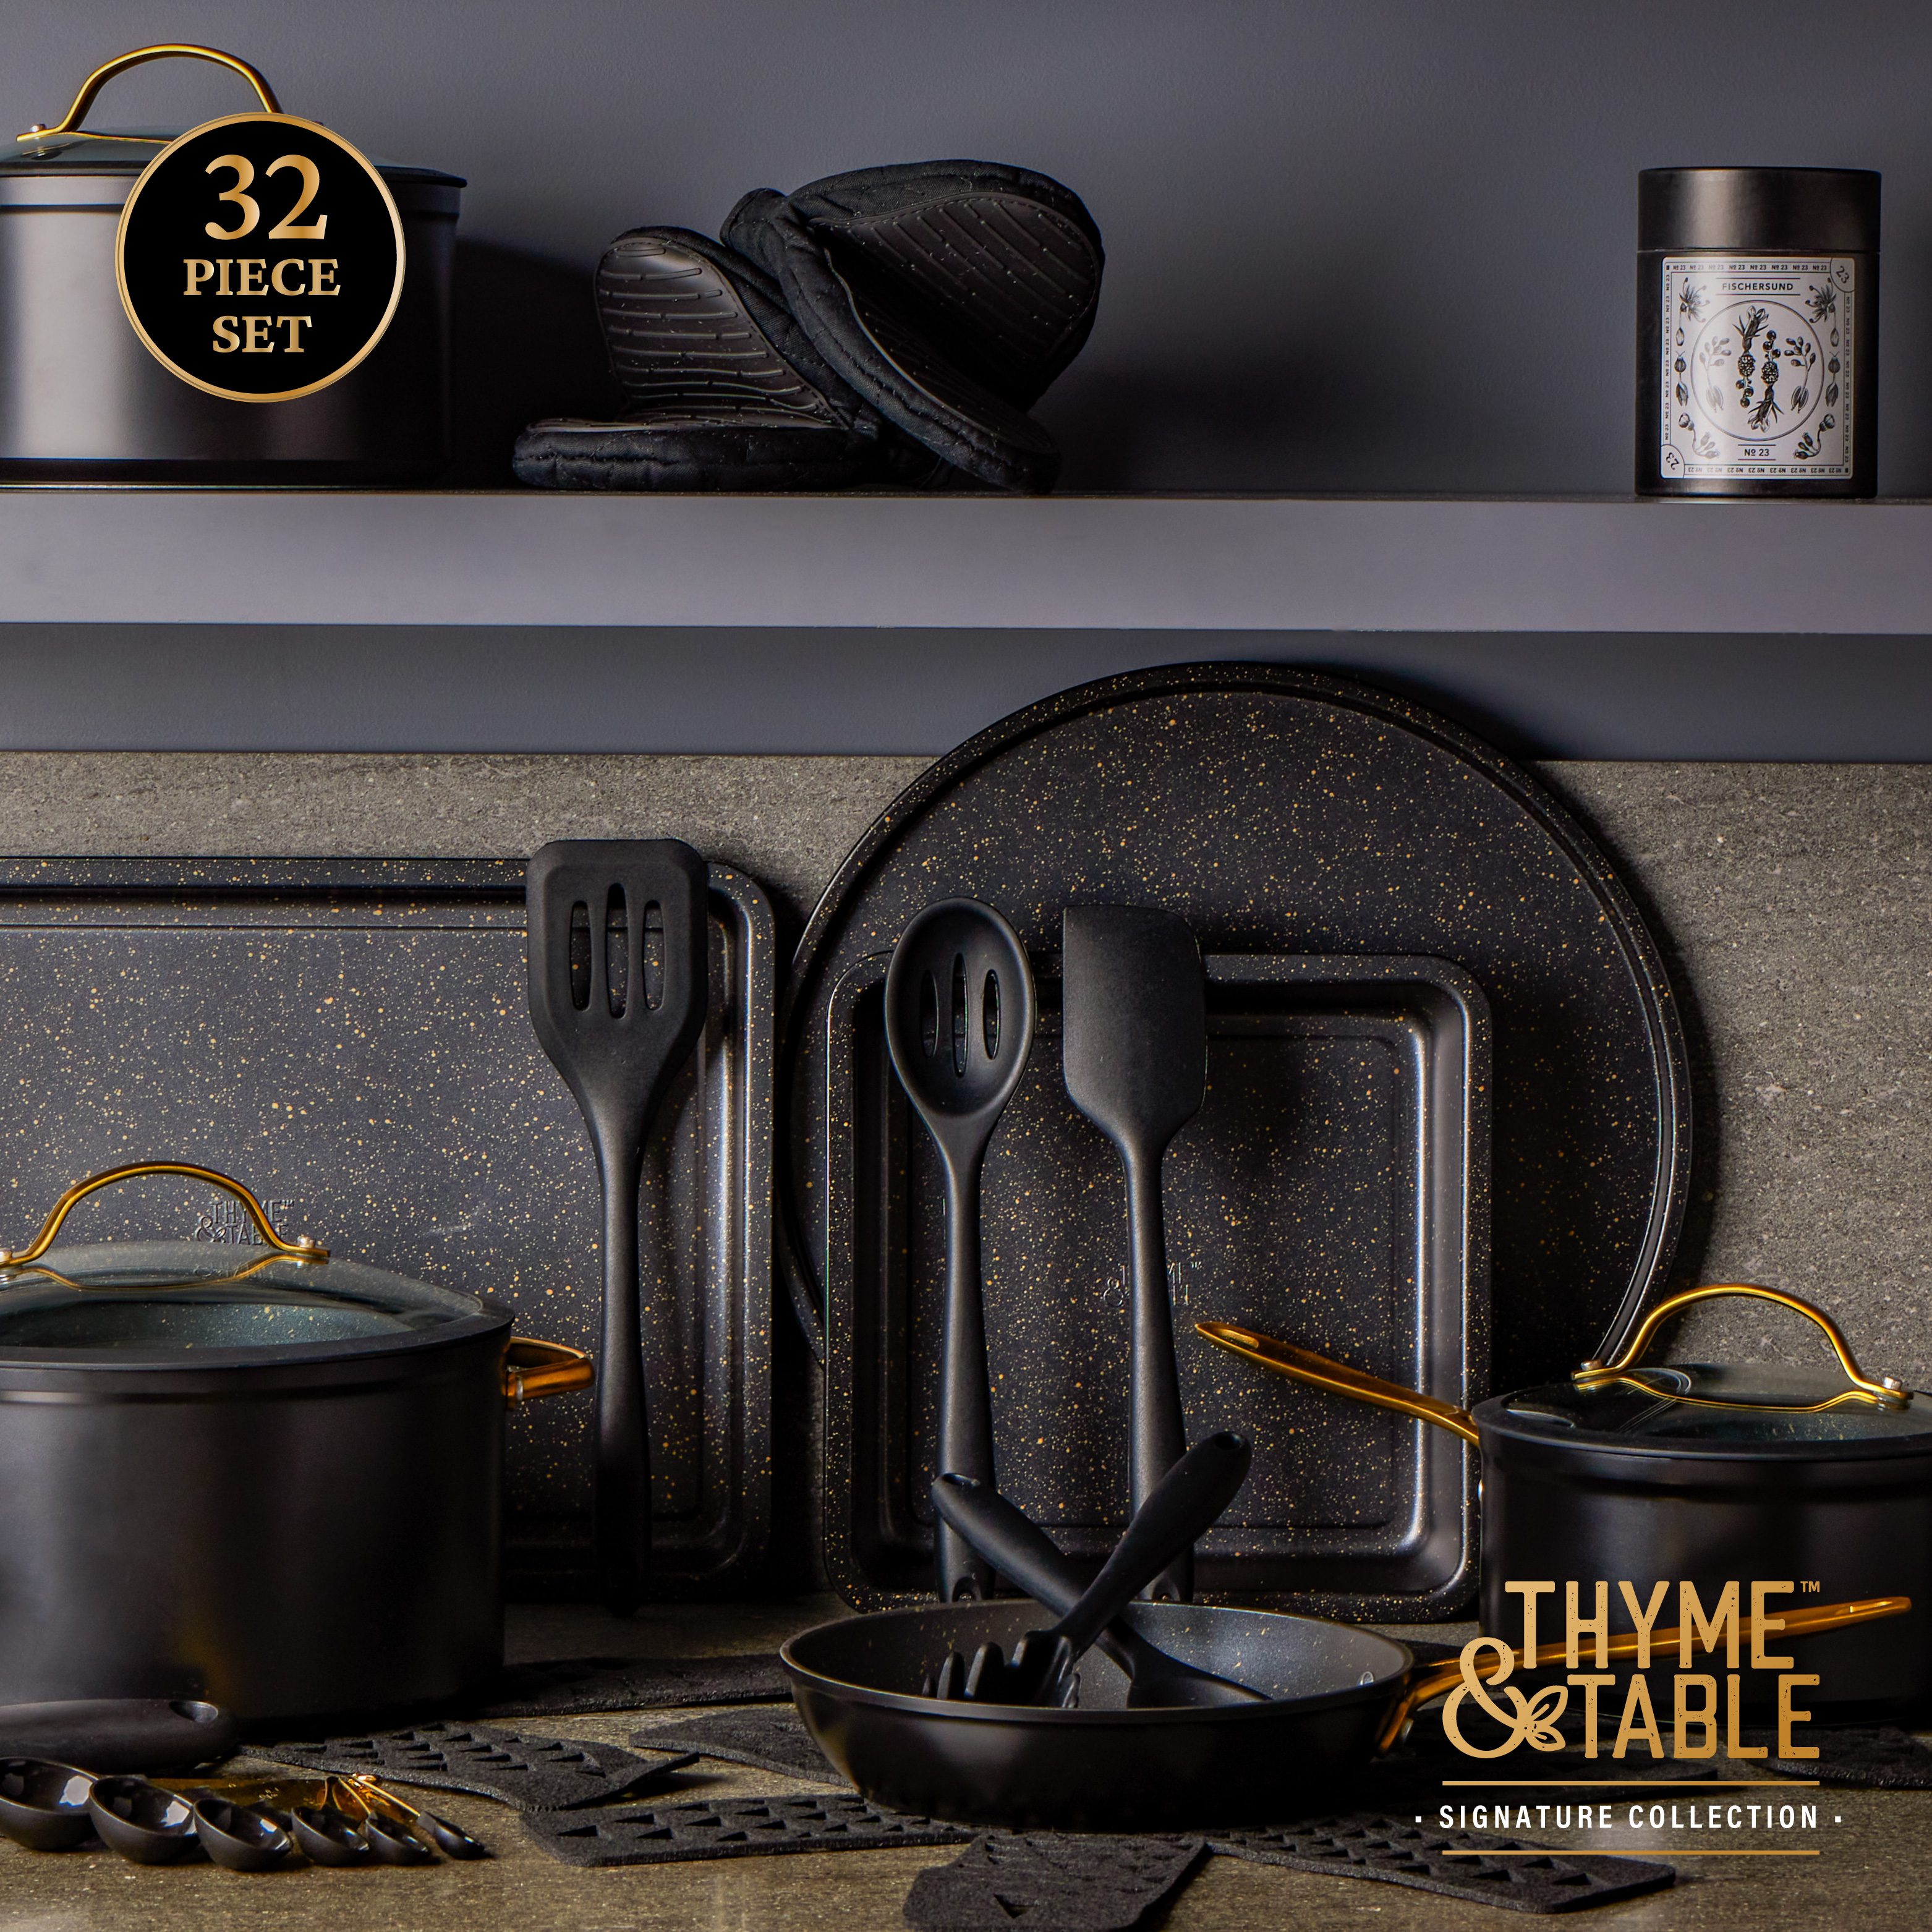 Thyme & Table 32-Piece Cookware & Bakeware Non-Stick Set, Black - image 5 of 6